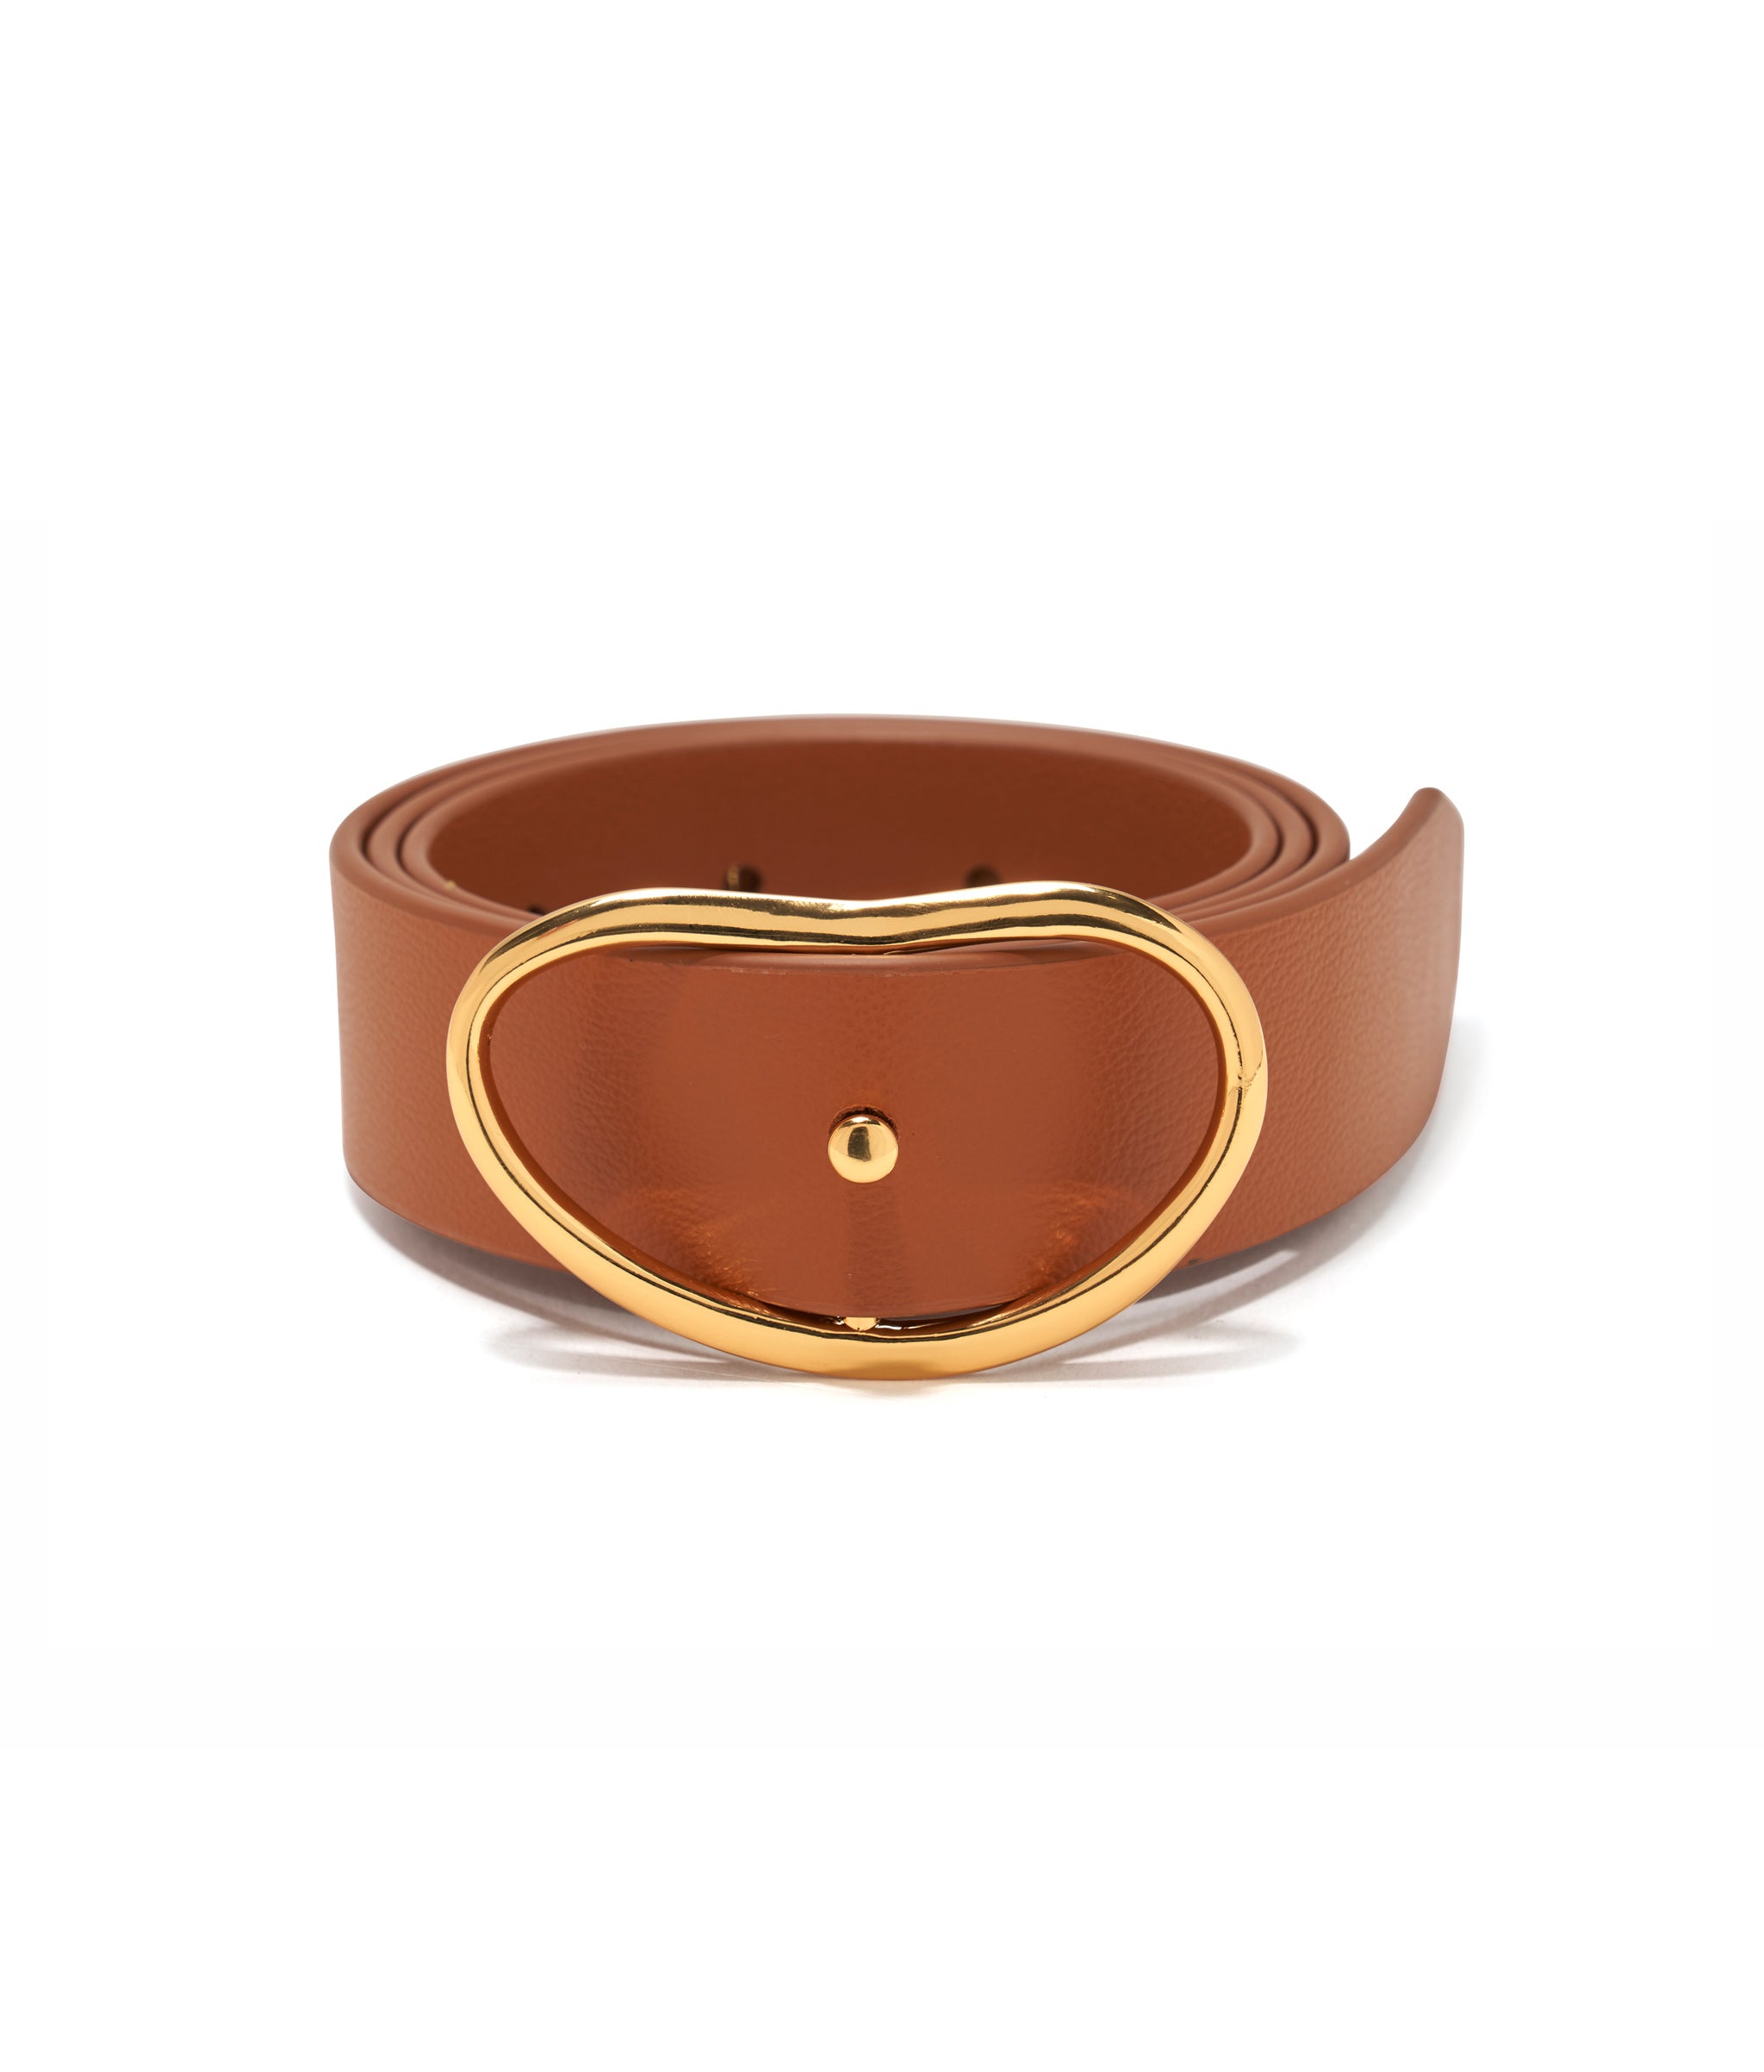 Wide Georgia Belt In Tan. Thick tan leather belt with gold-plated brass kidney-shaped buckle.